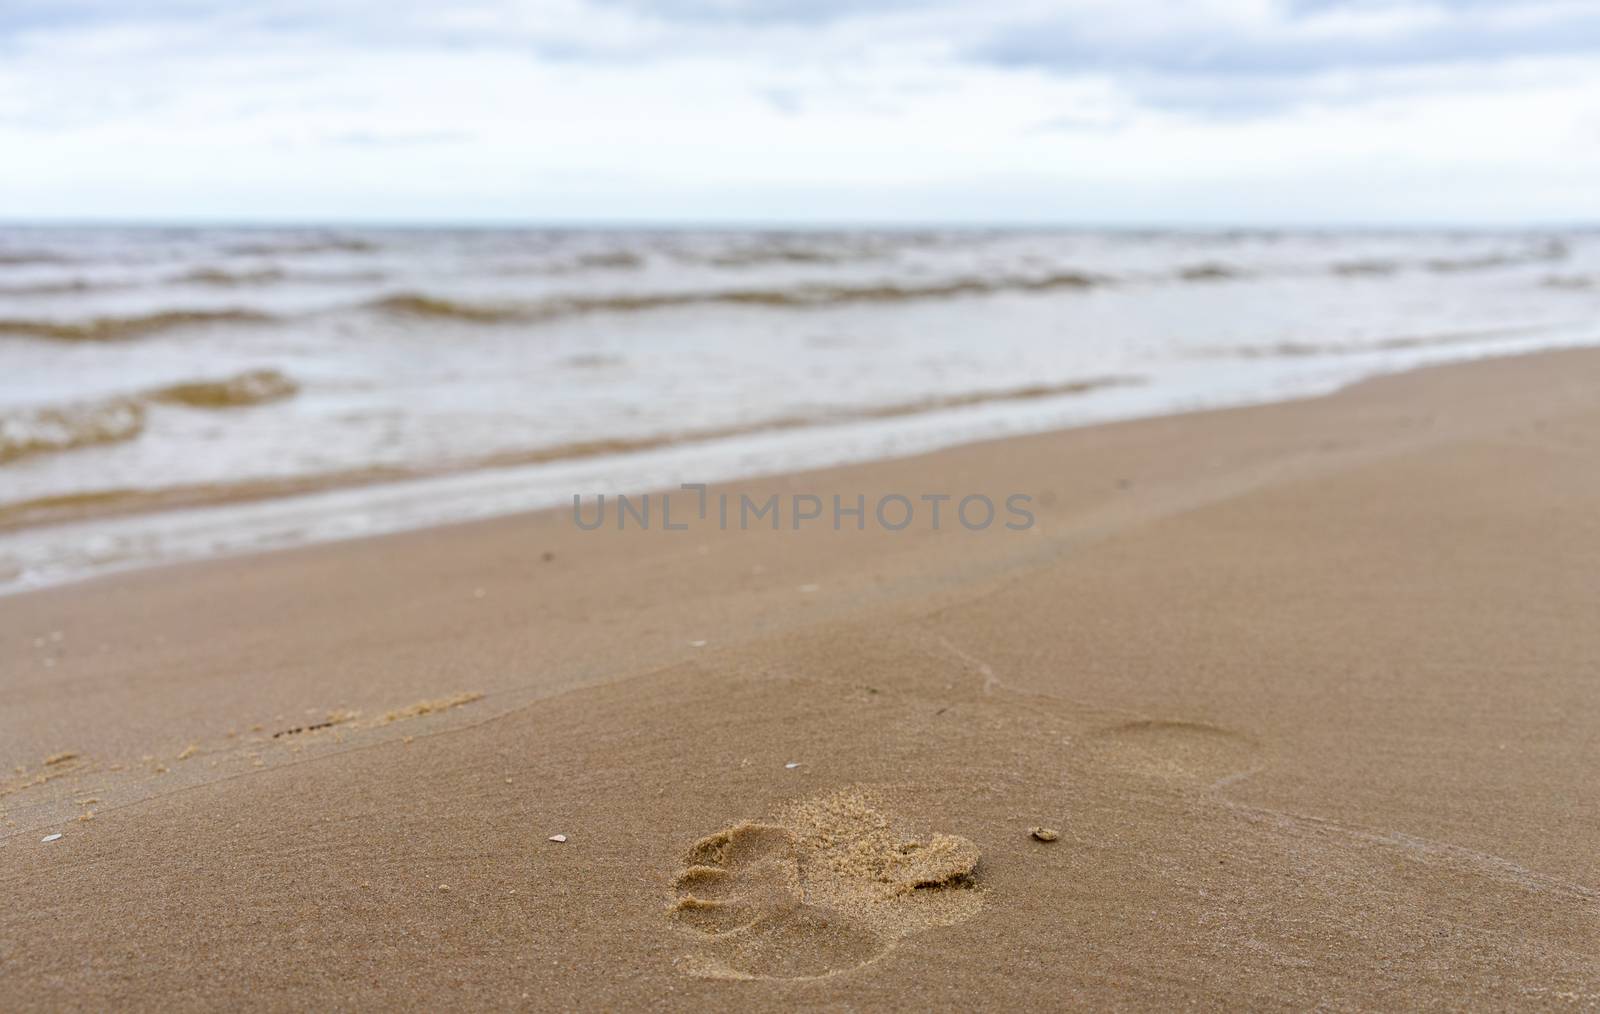 Trail of bare feet on the wet sand of a beach